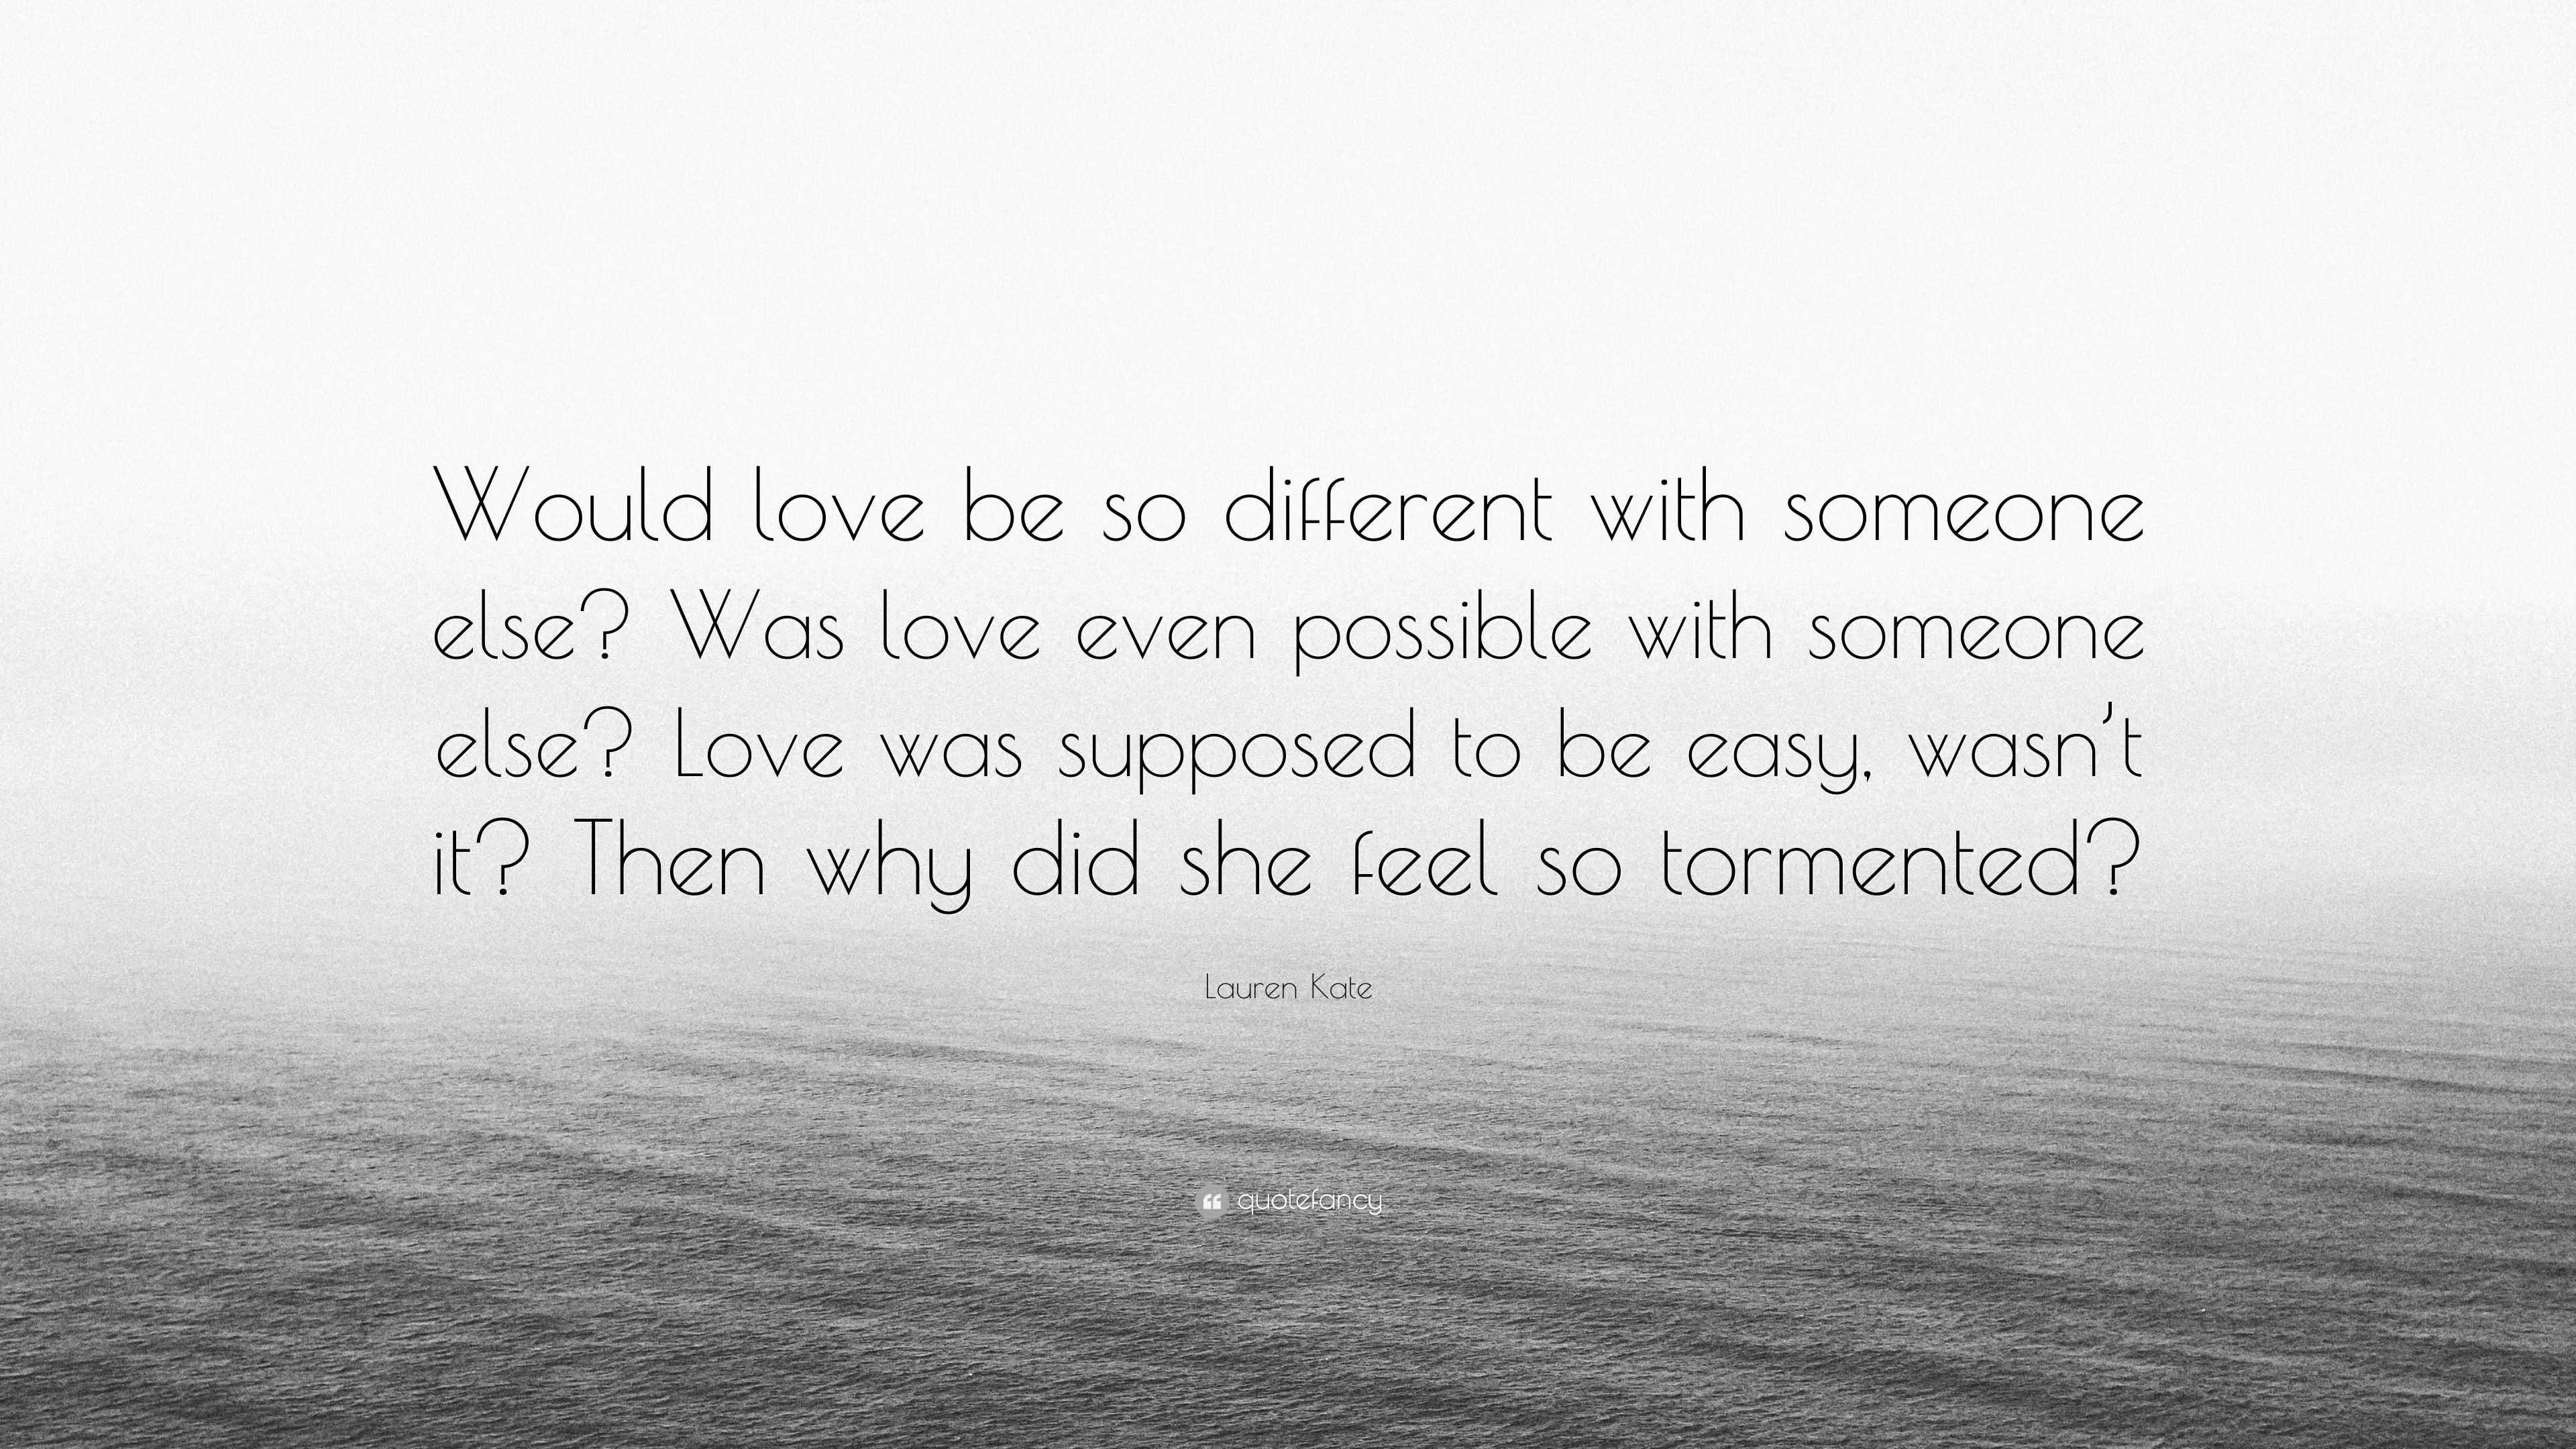 Lauren Kate Quote “Would love be so different with someone else Was love